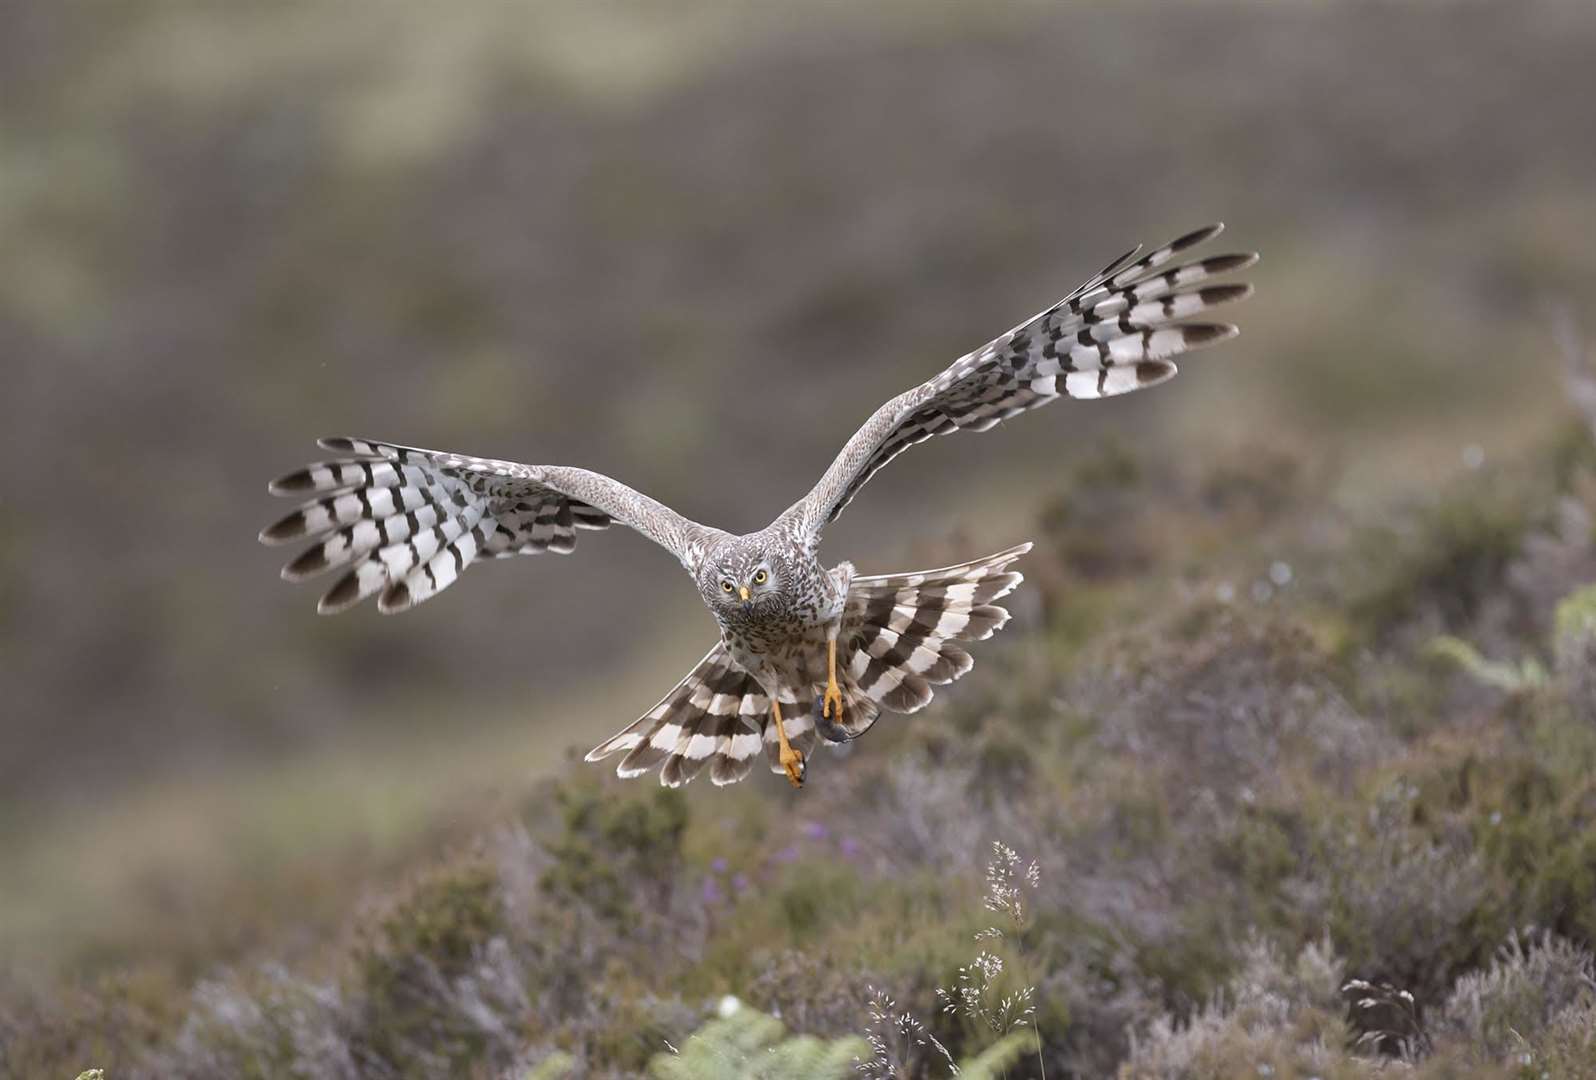 Hen harrier (Circus cyaneus) adult female bringing in a shrew as prey to its nest in the Highlands.